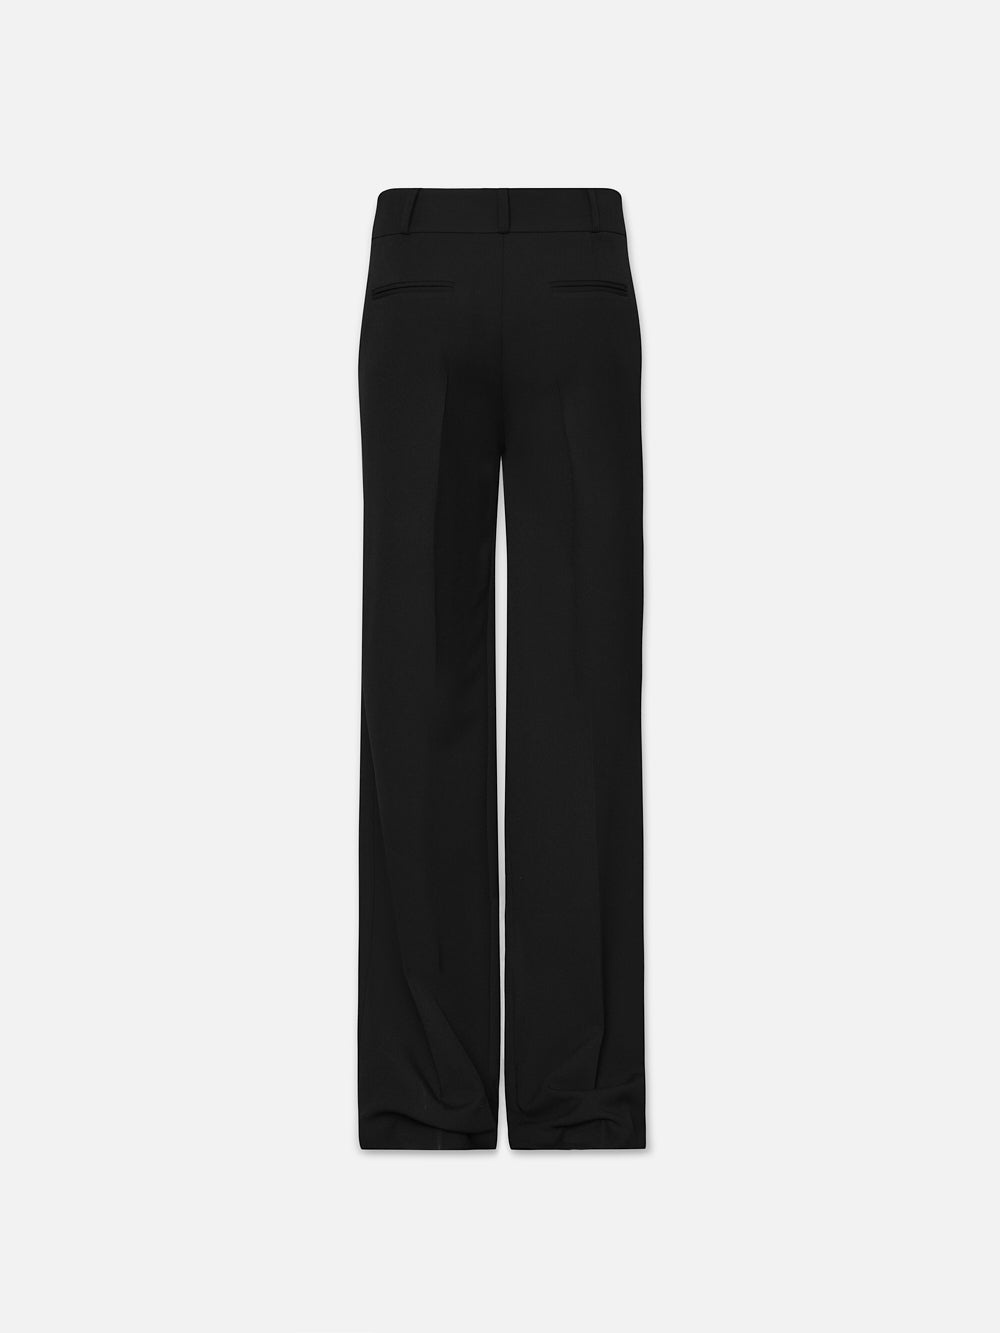 Relaxed Trouser in Black - 2